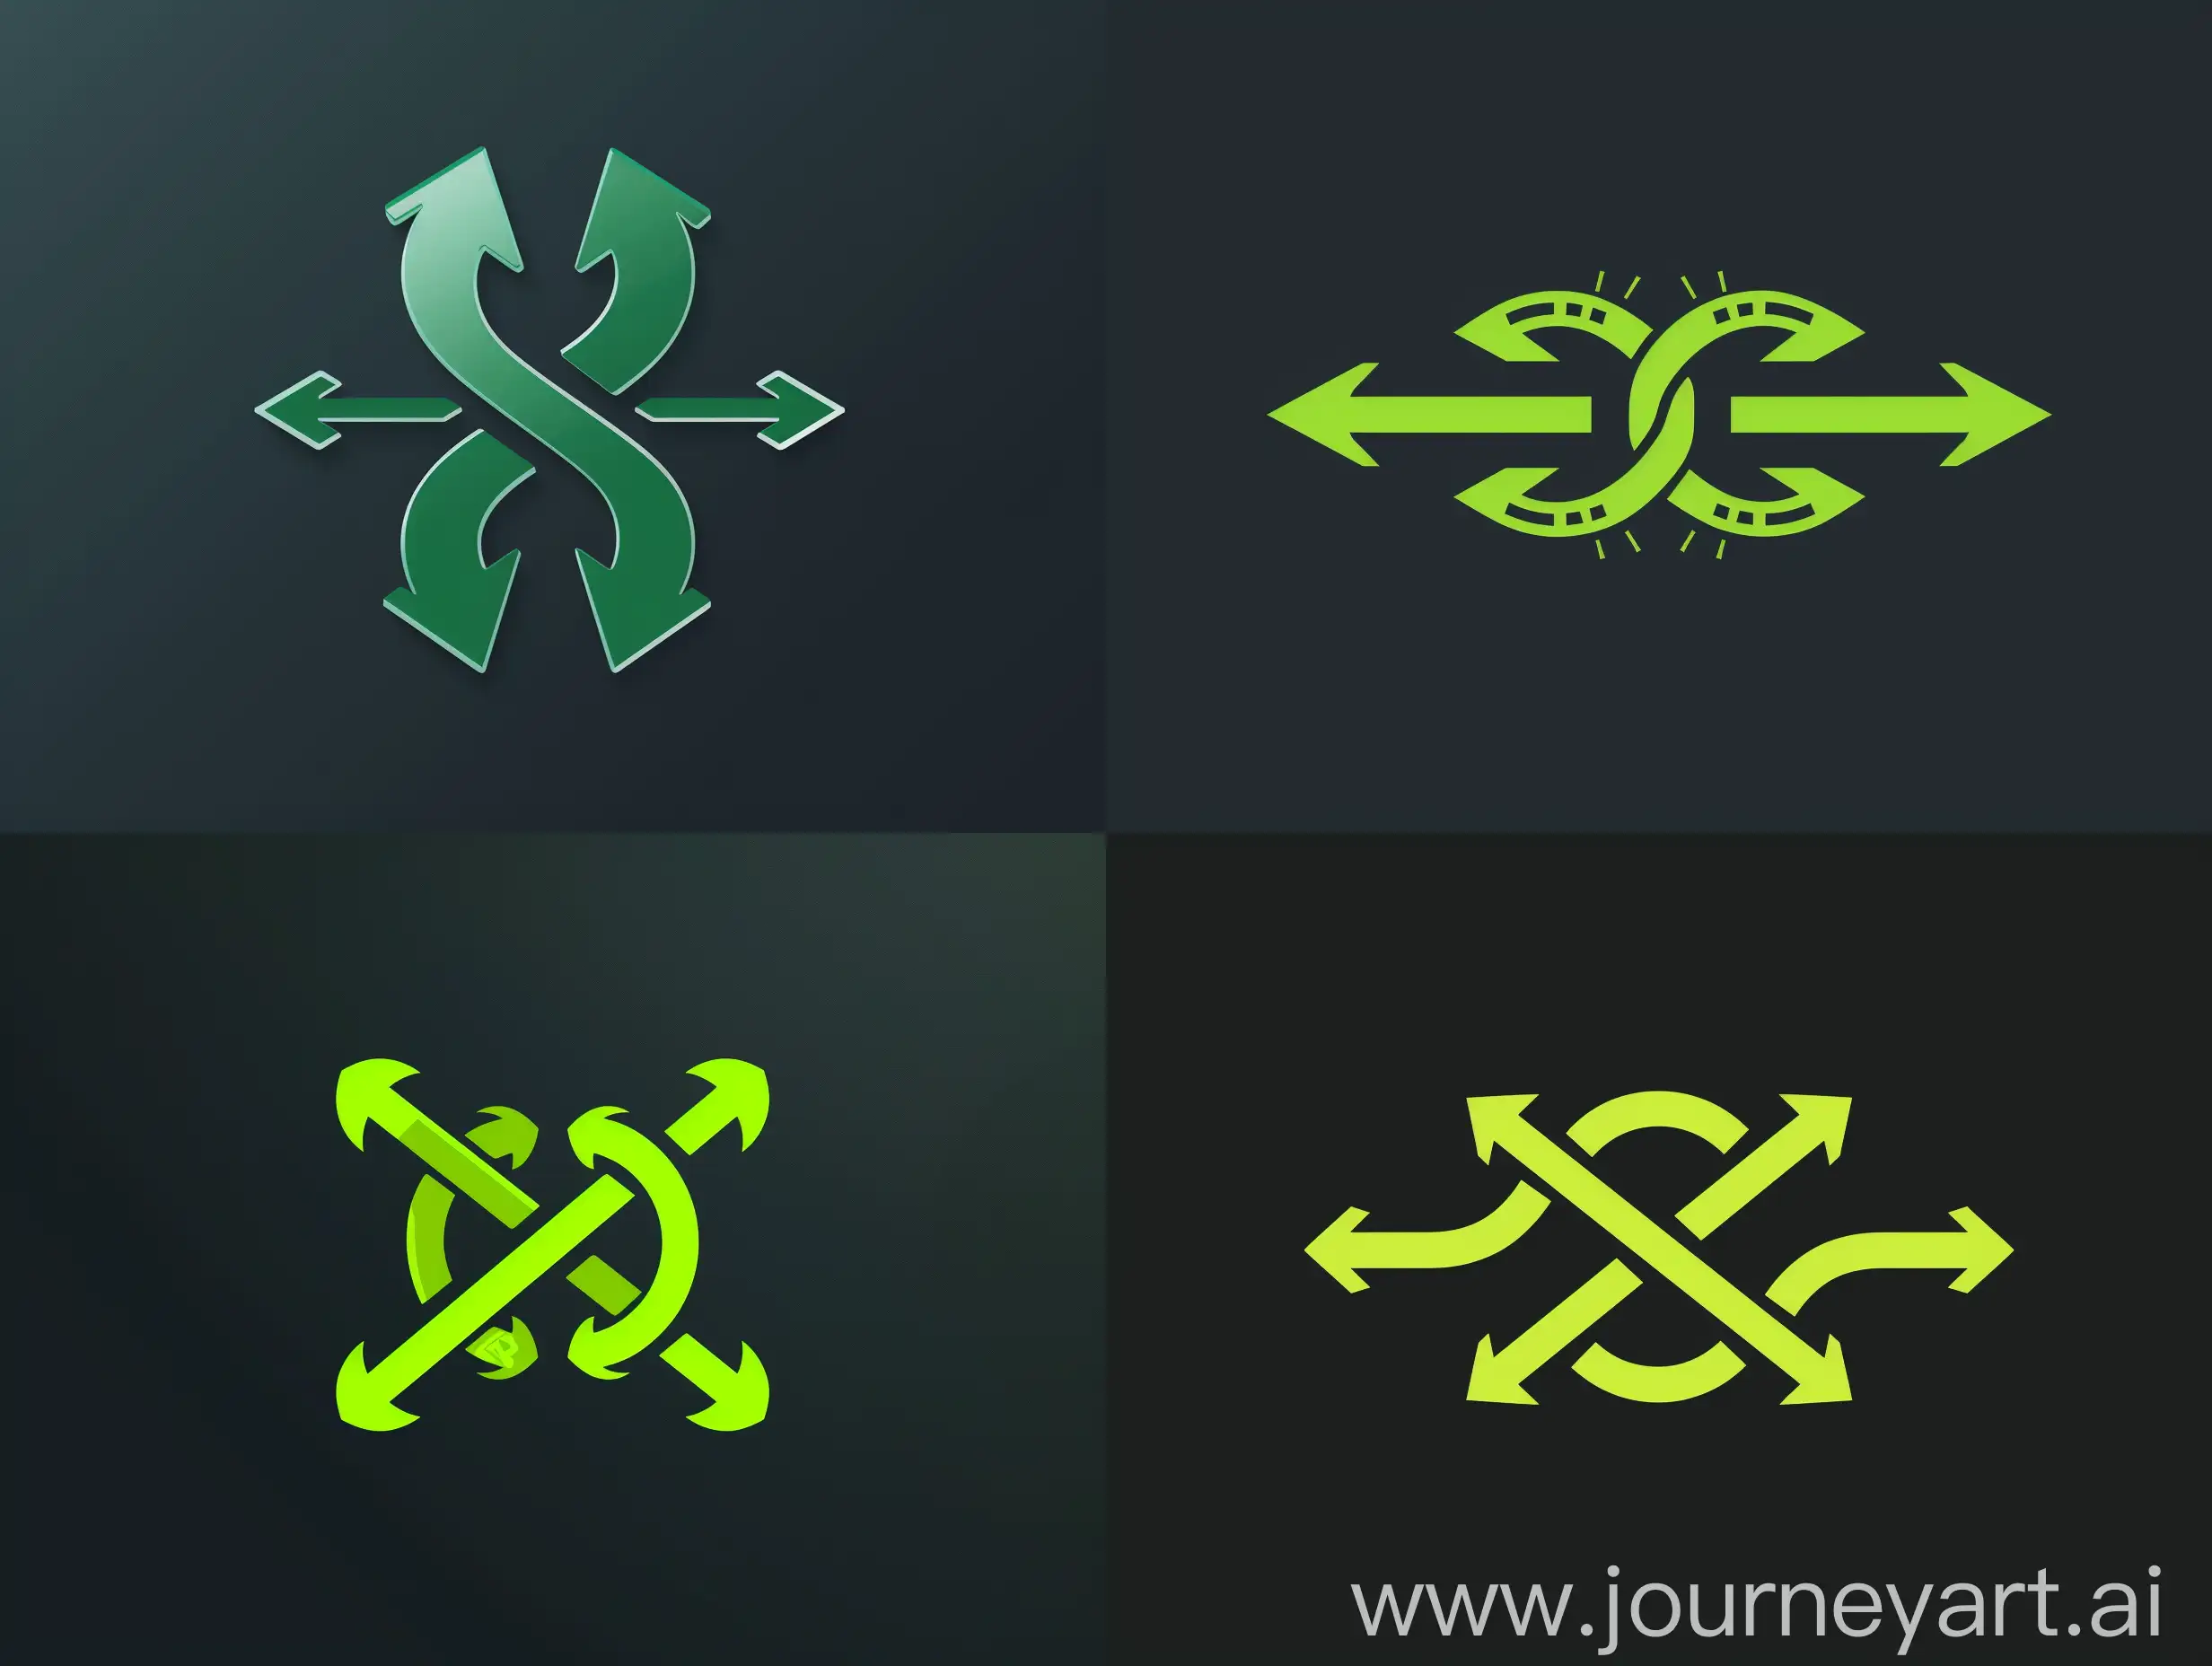 logo - infinity icon with 6 arrows going in different directions. Color green